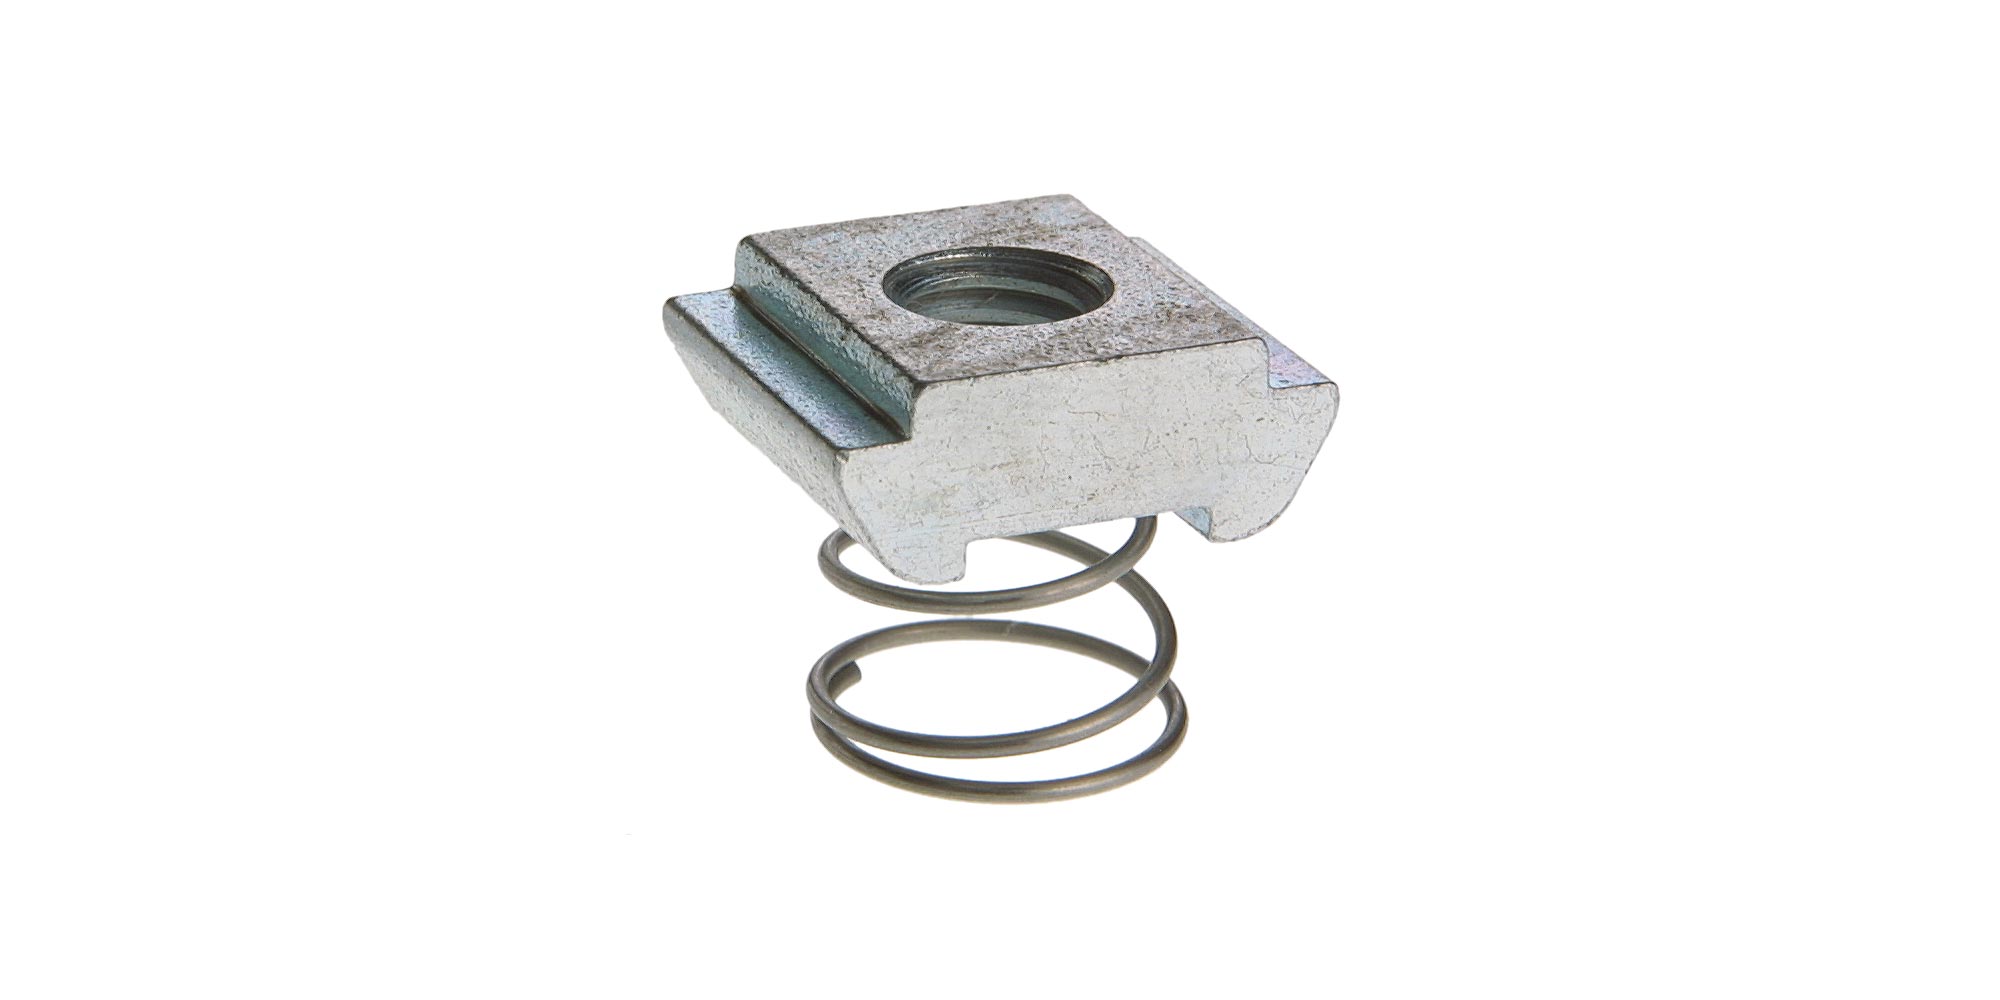 Slot nut C20 M6 galvanized steel, without screw, with spring